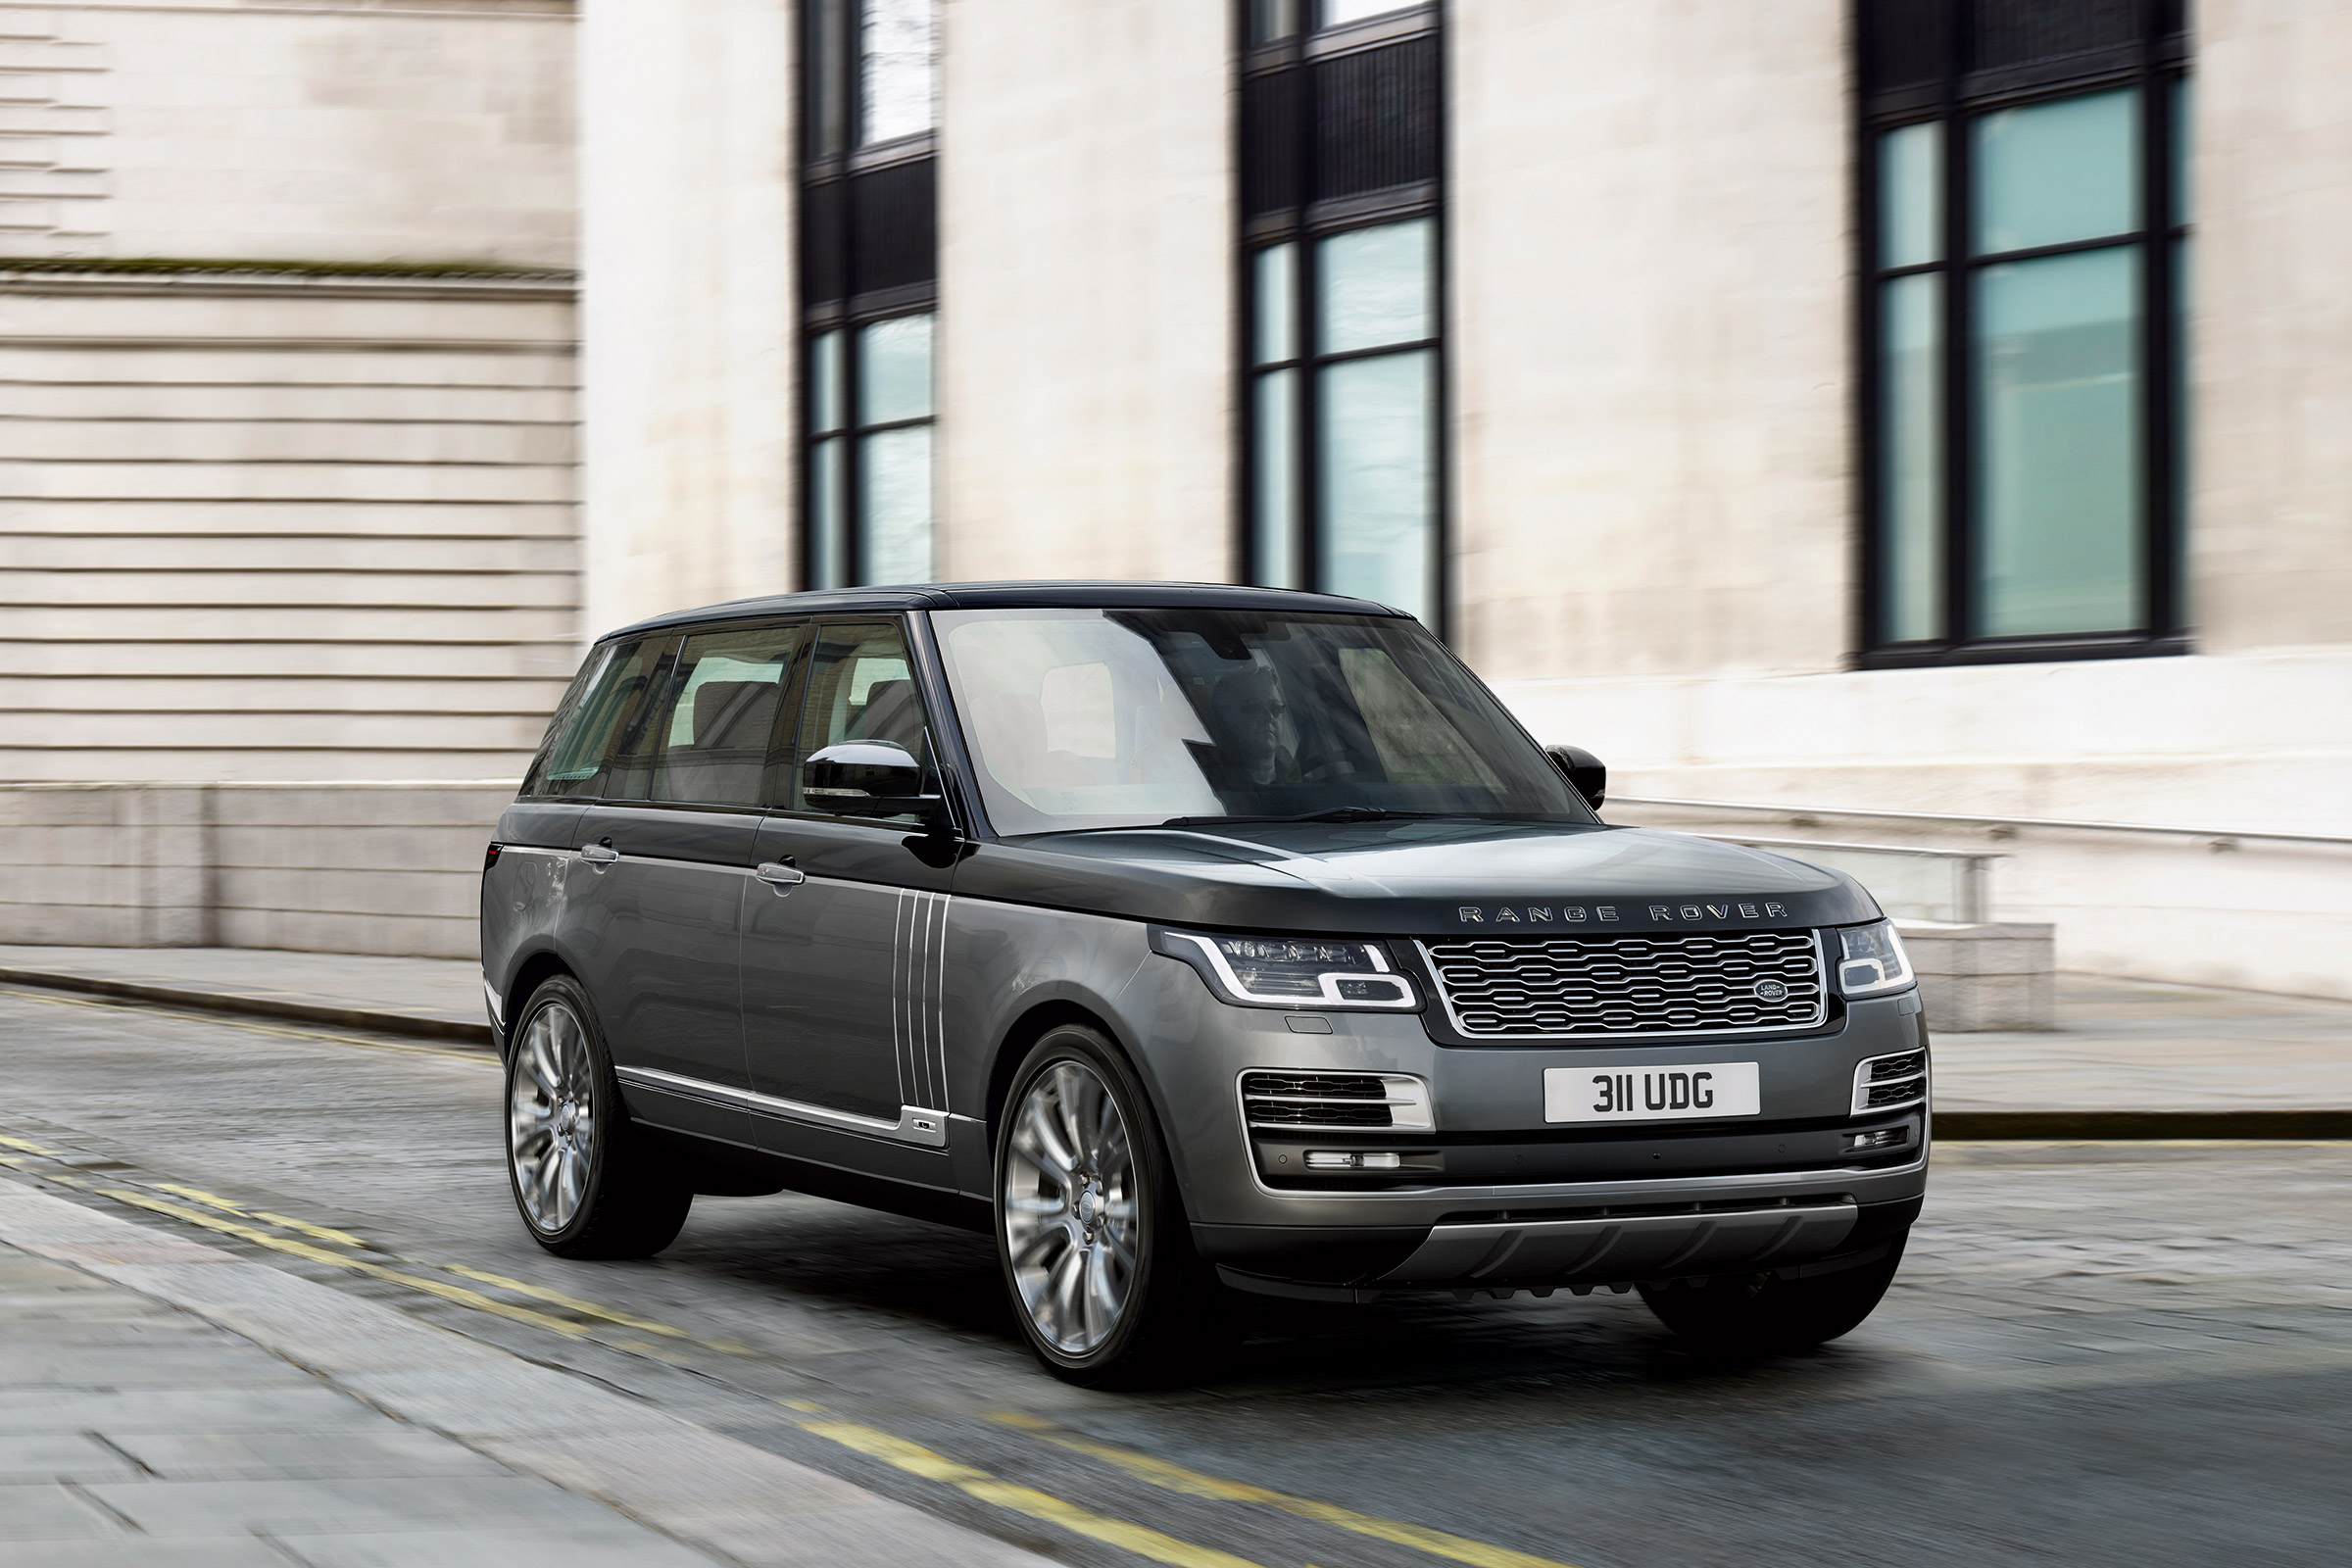 Range Rover Lwb Autobiography For Sale Uk  : Stay Connected With Land Rover.